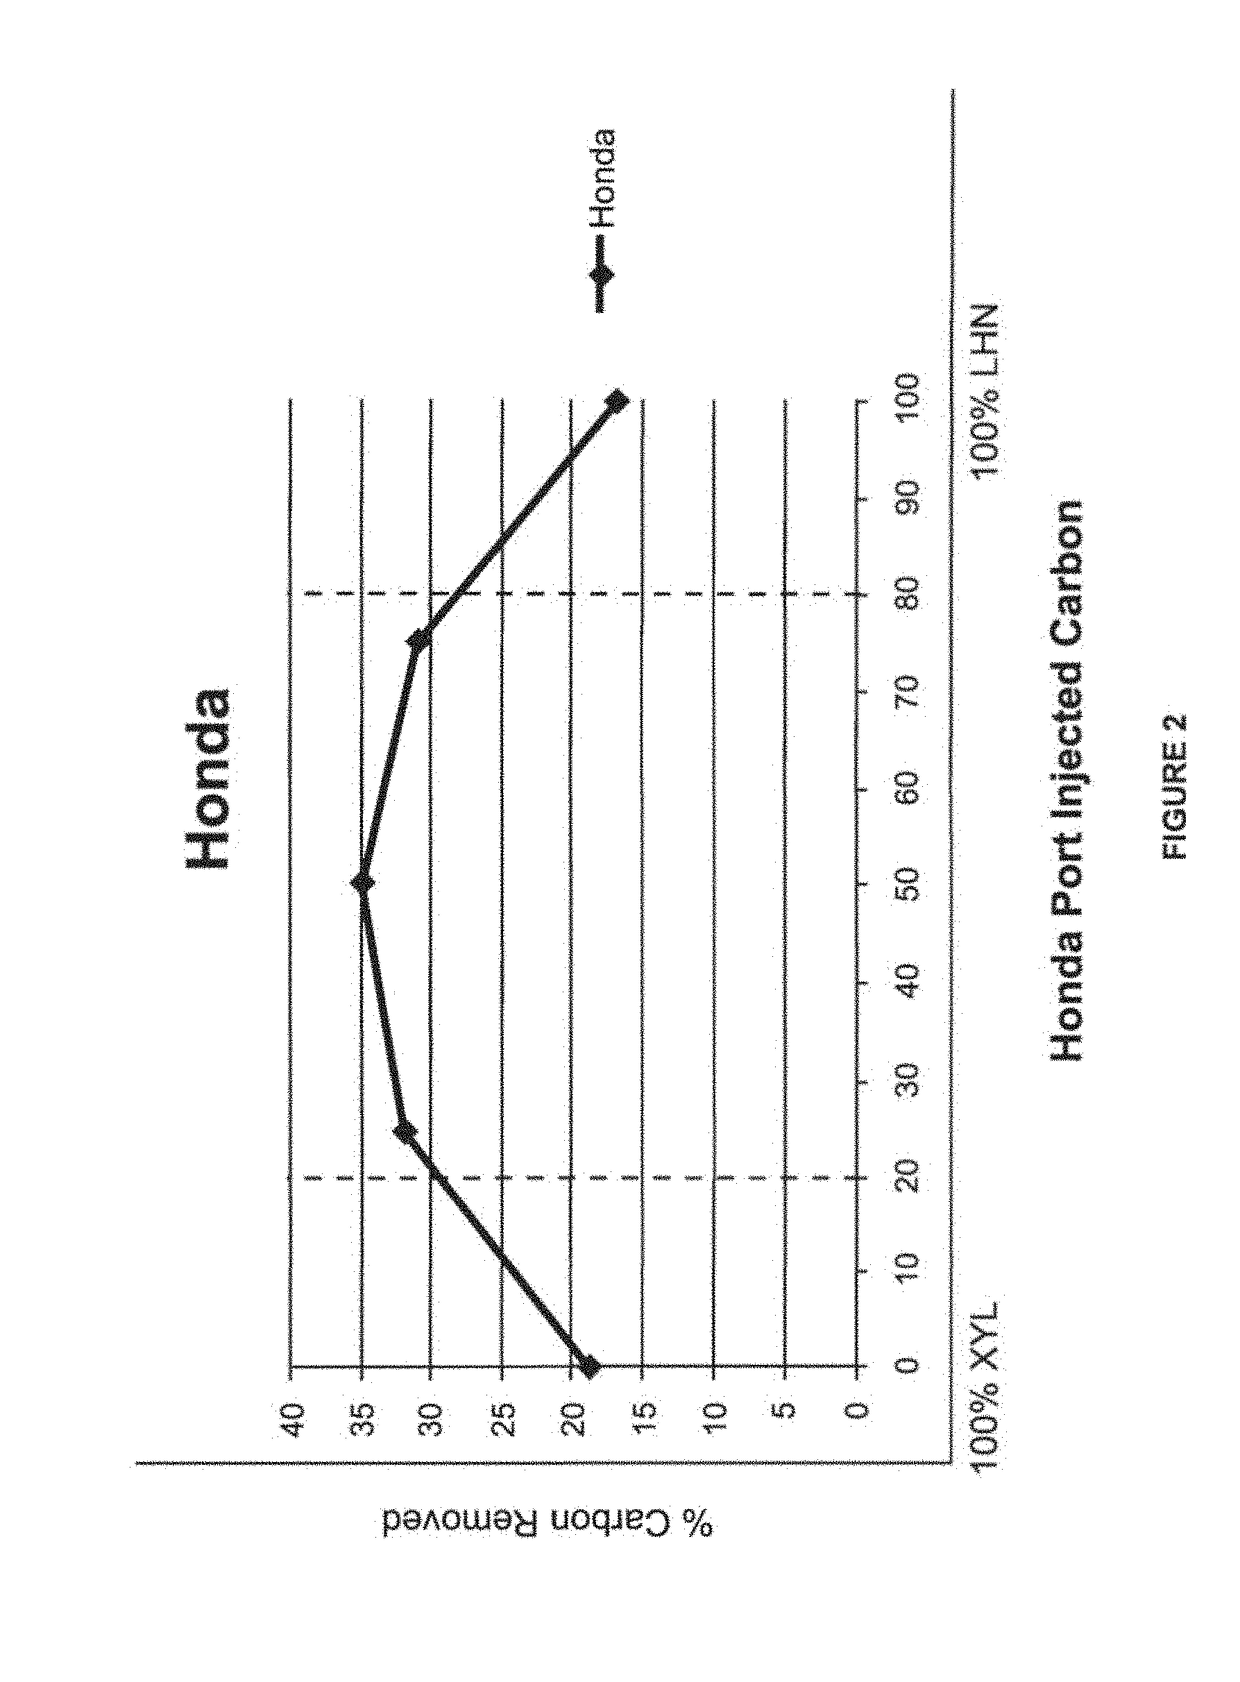 Compositions for Engine Carbon Removal and Methods and Apparatus for Removing Carbon - III